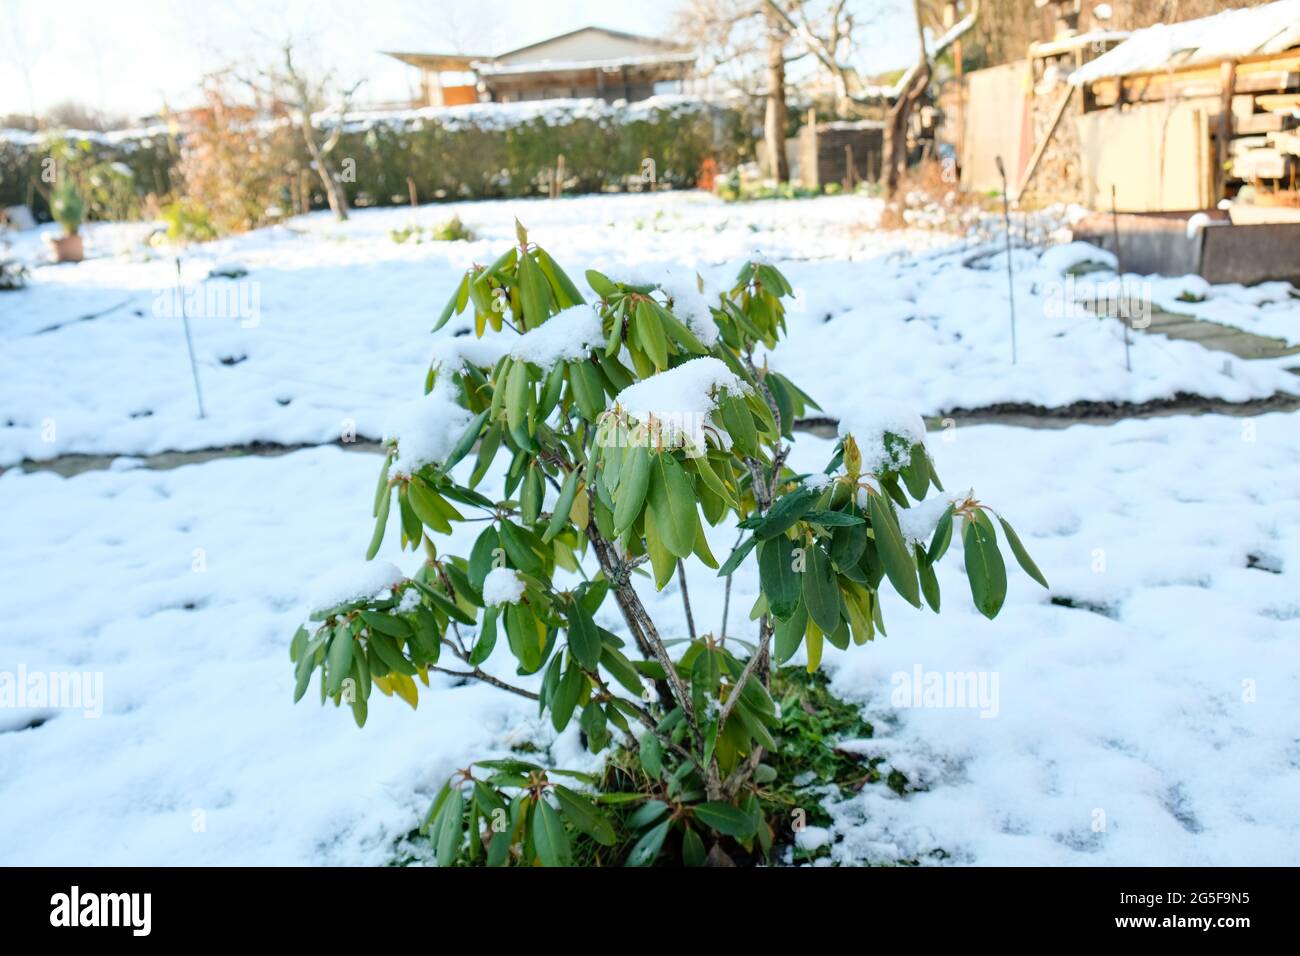 Rhododendron covered with snow in winter daytime Stock Photo